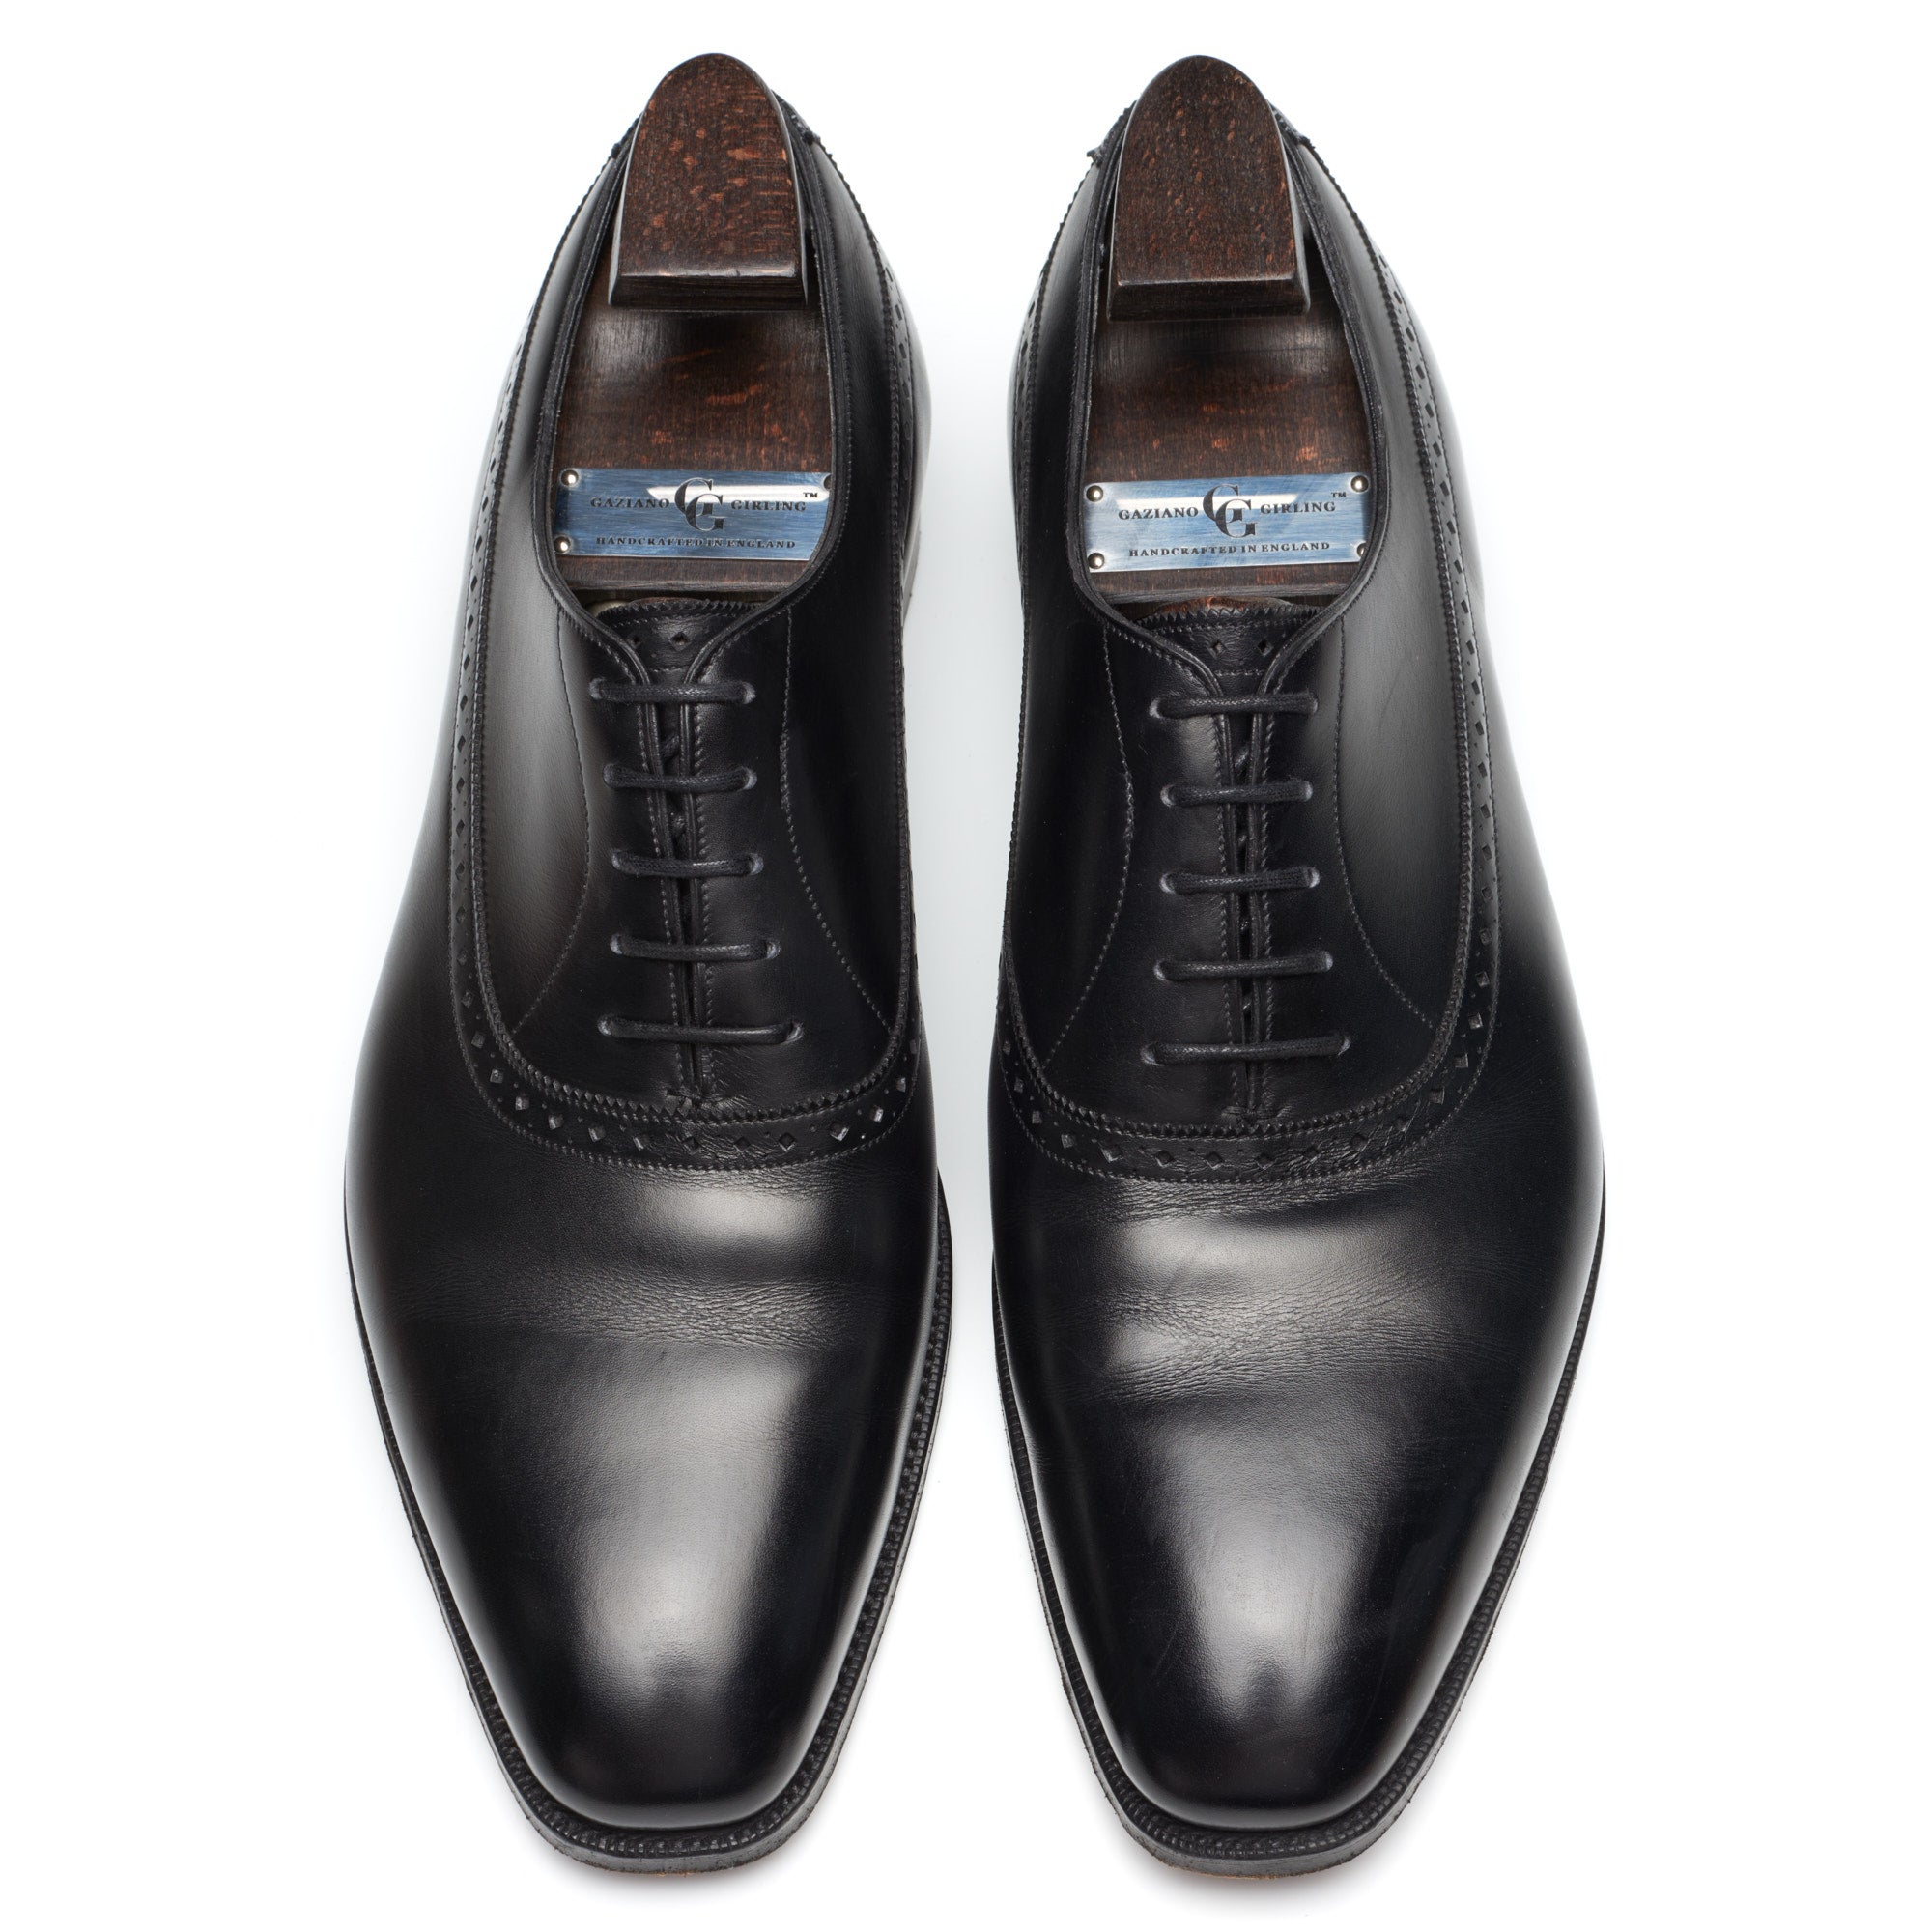 GAZIANO & GIRLING "Kent" Black Calf Leather Oxford Dress Shoes 8E US 8.5 Last MH71 GAZIANO & GIRLING